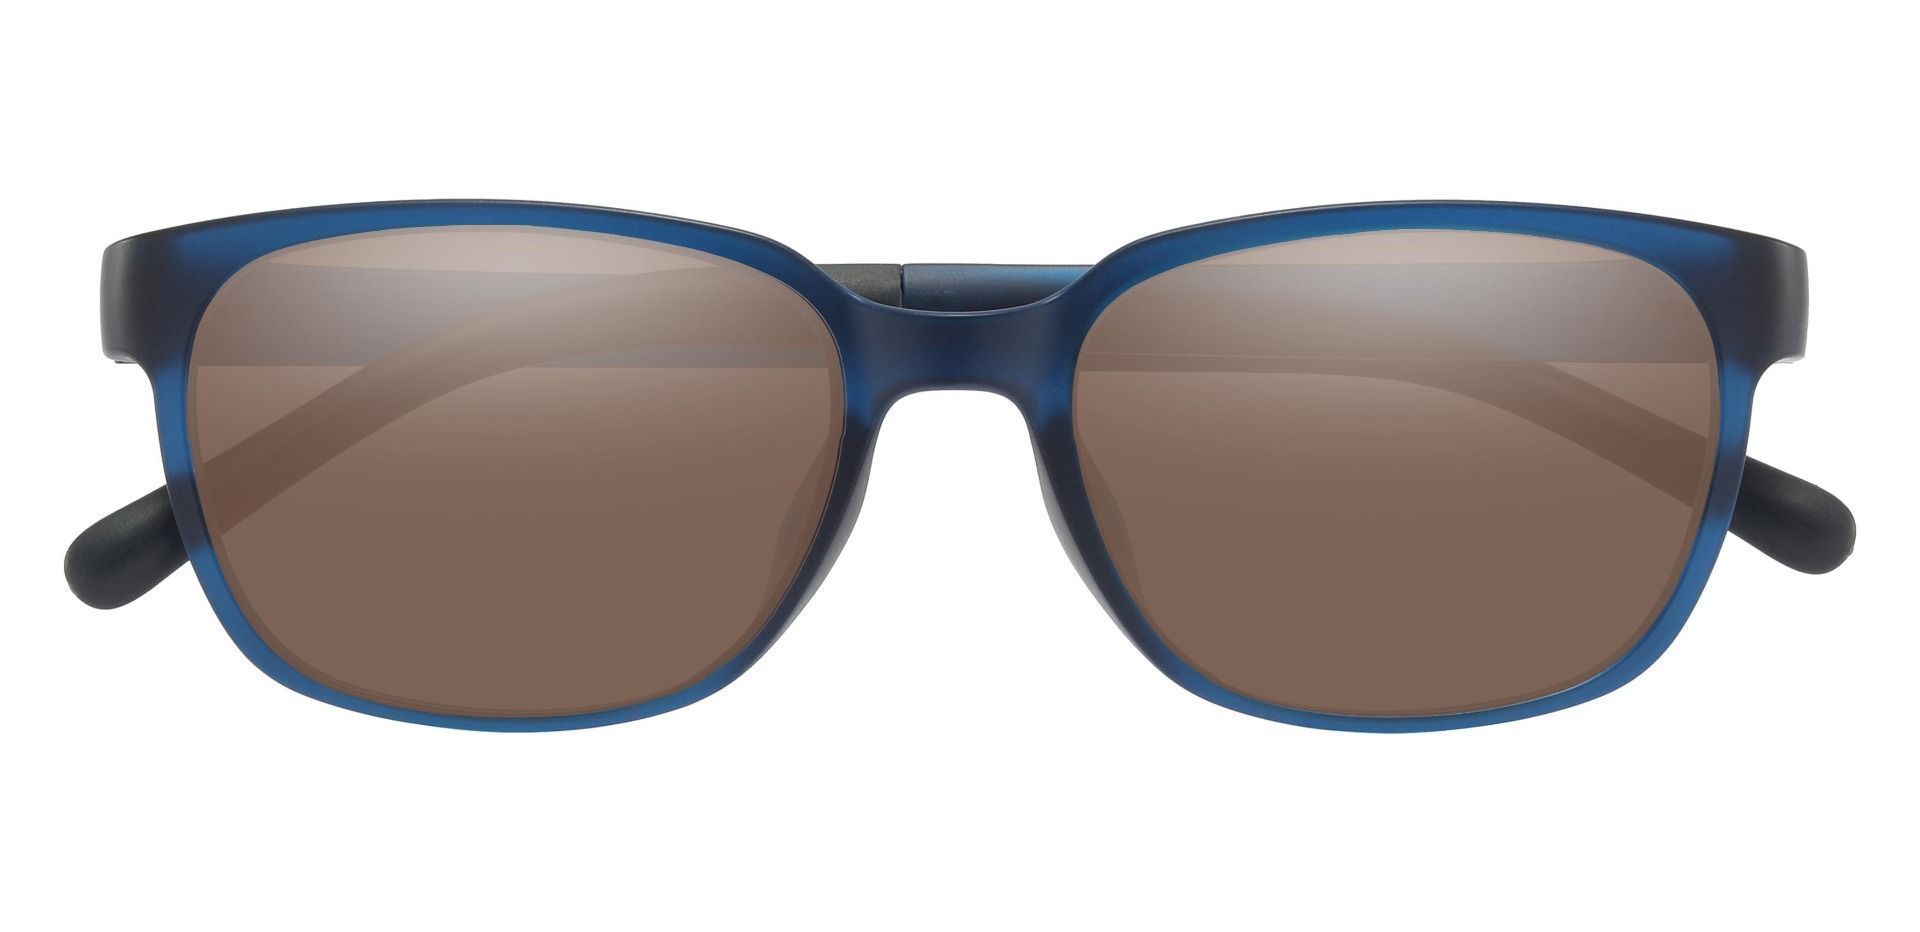 Orchard Rectangle Non-Rx Sunglasses - Blue Frame With Brown Lenses